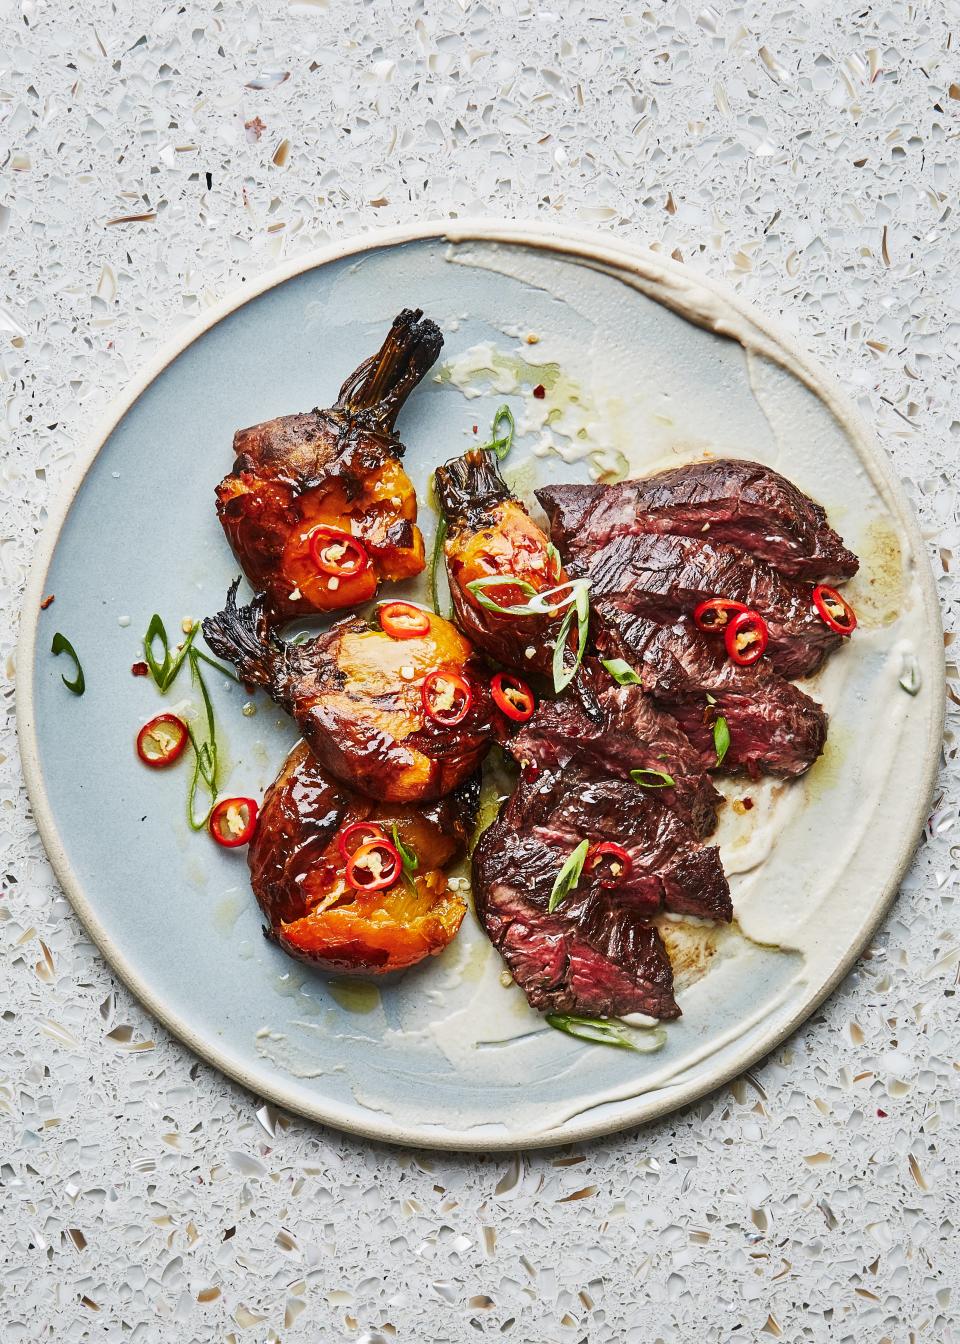 Hanger Steak with Tahini and Smashed Charred Beets